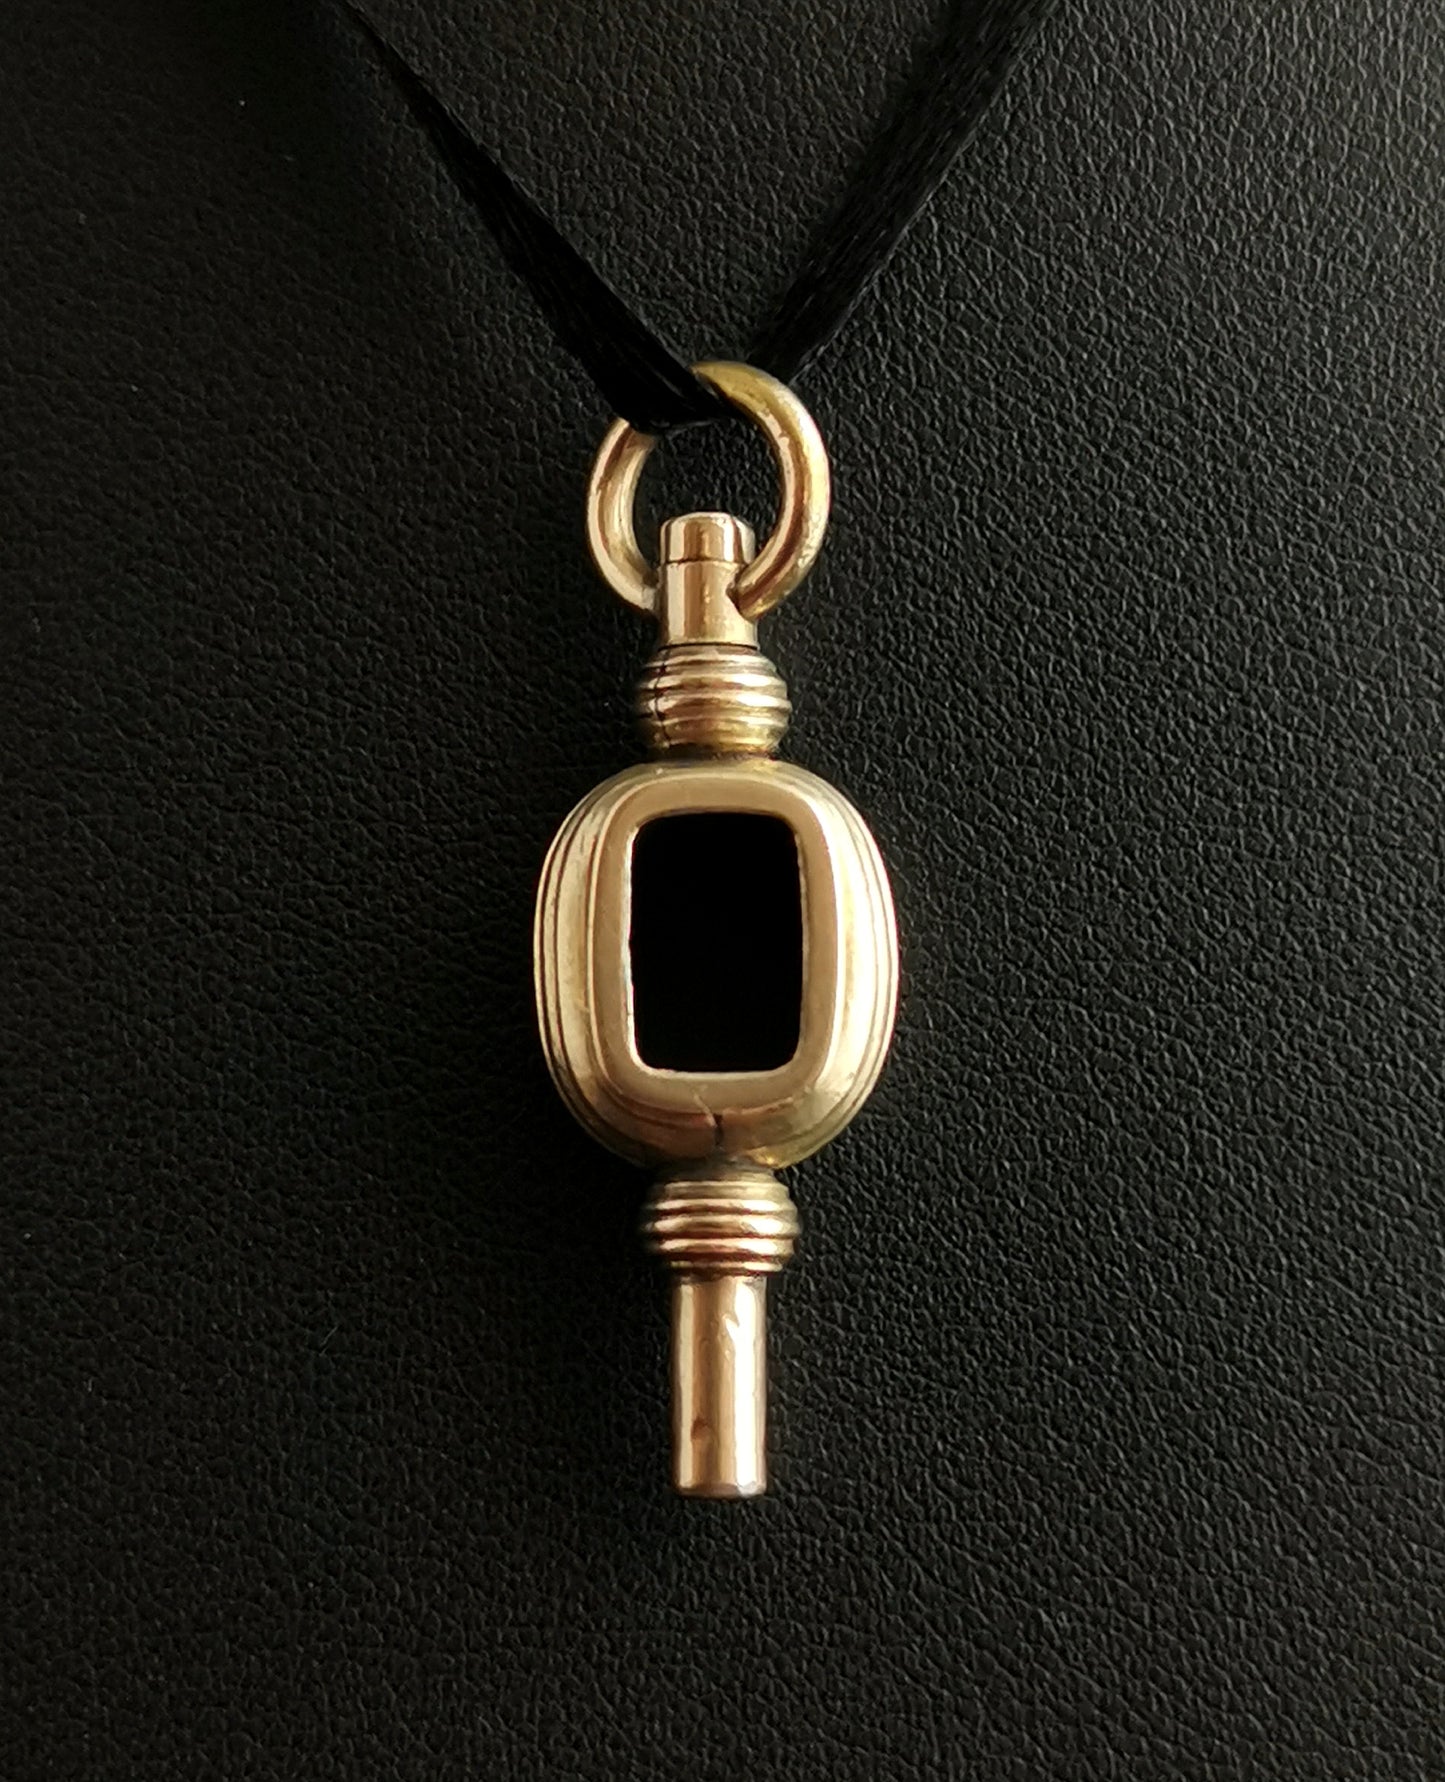 Antique Victorian gold plated watch key pendant